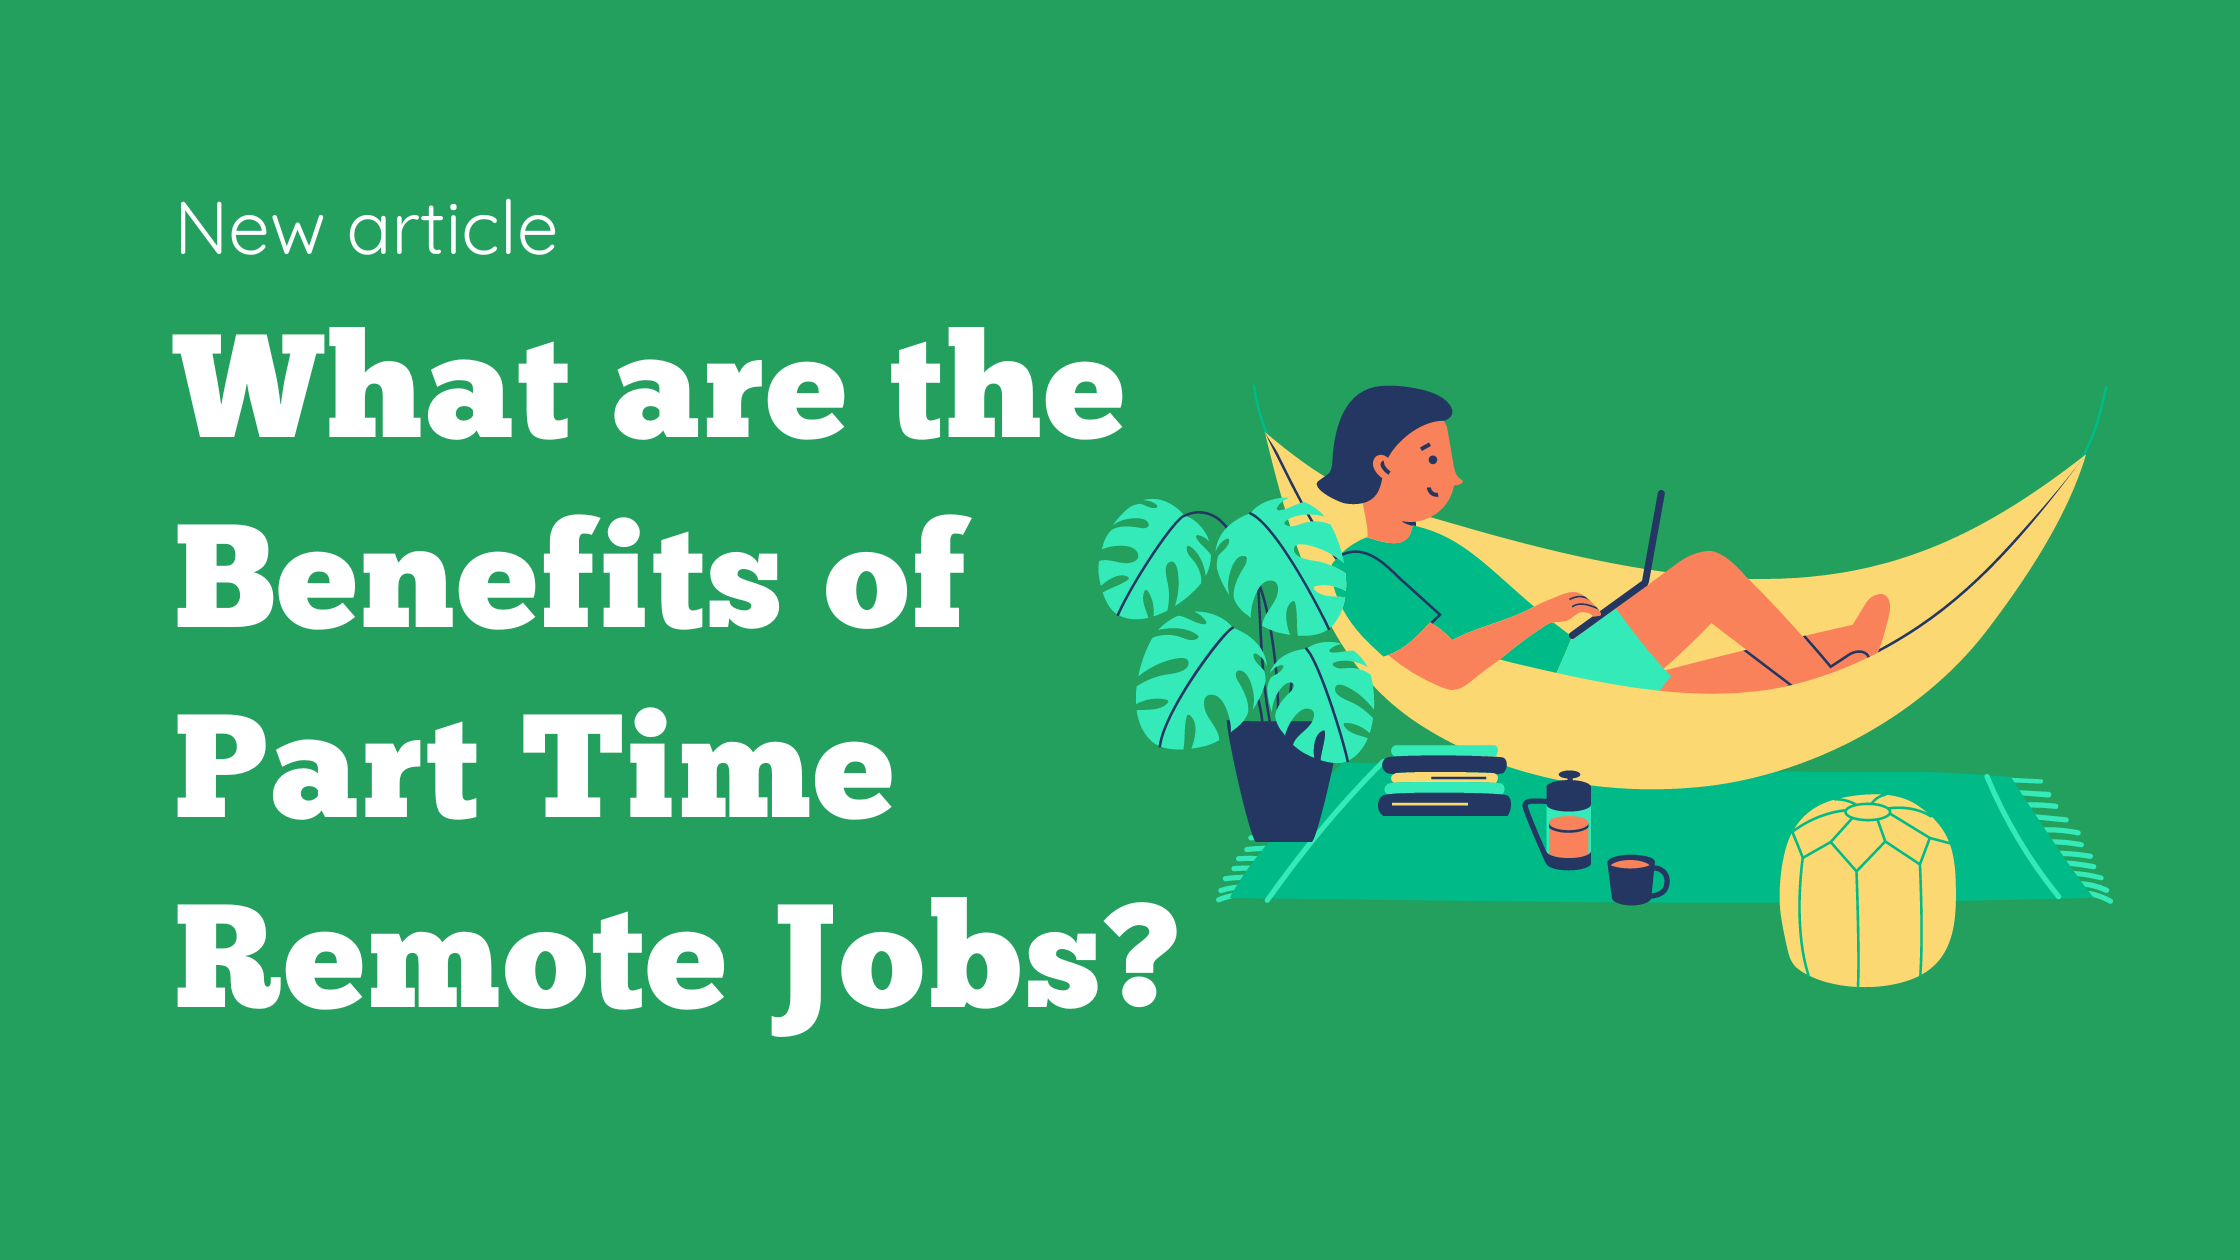 What are the Benefits of Part Time Remote Jobs?